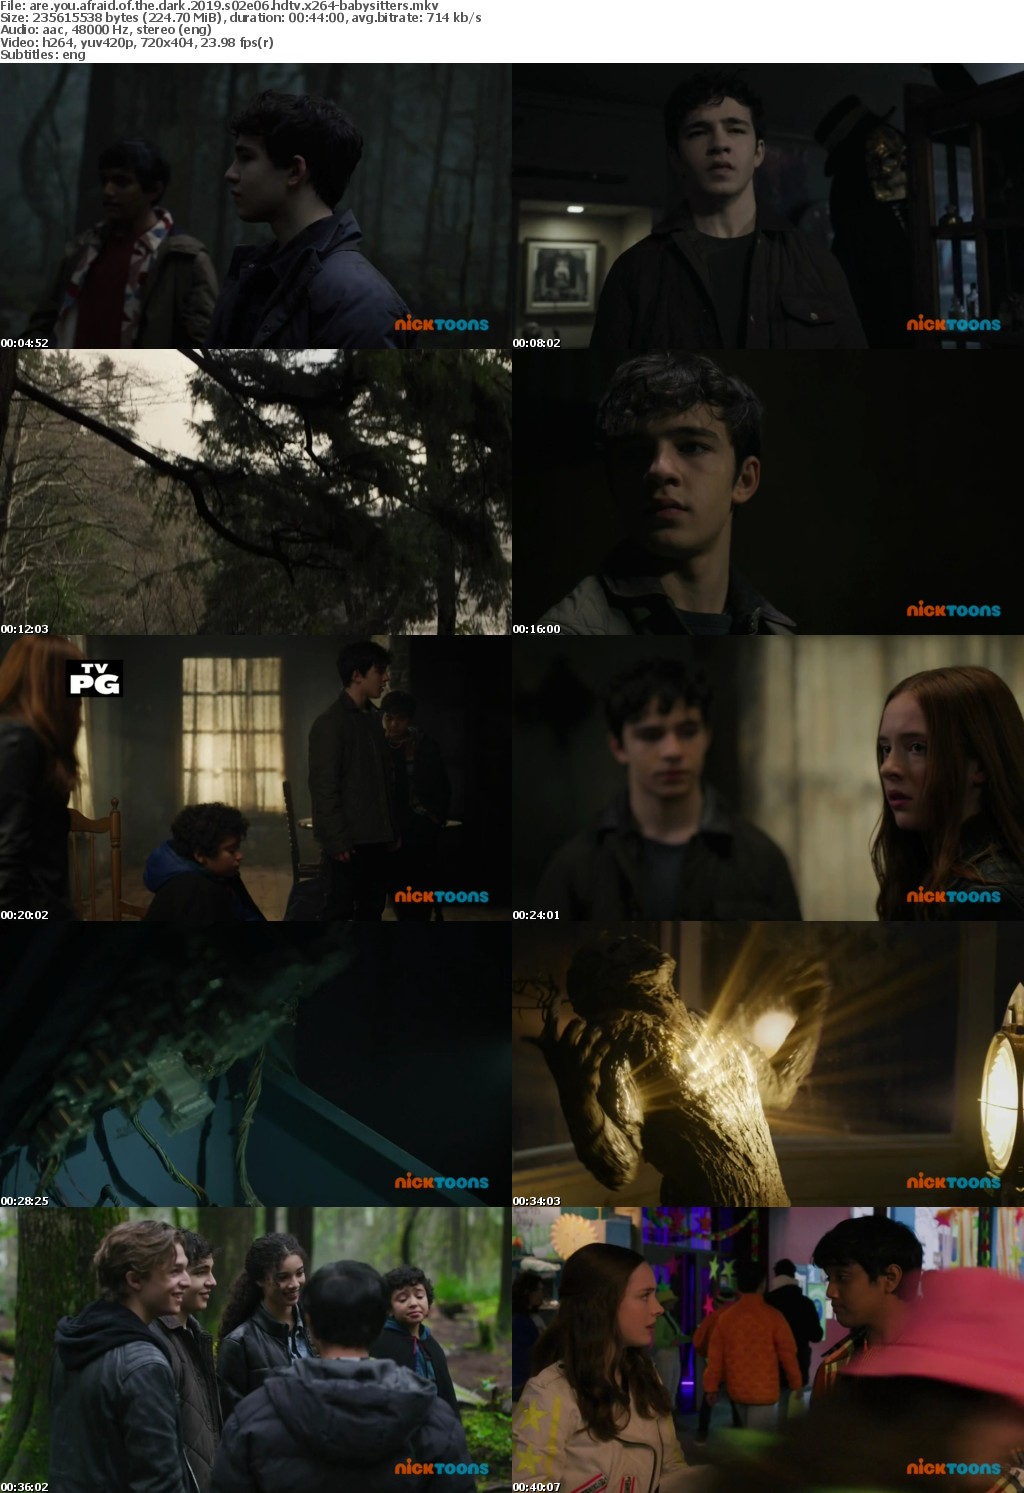 Are You Afraid of the Dark 2019 S02E06 HDTV x264-BABYSITTERS